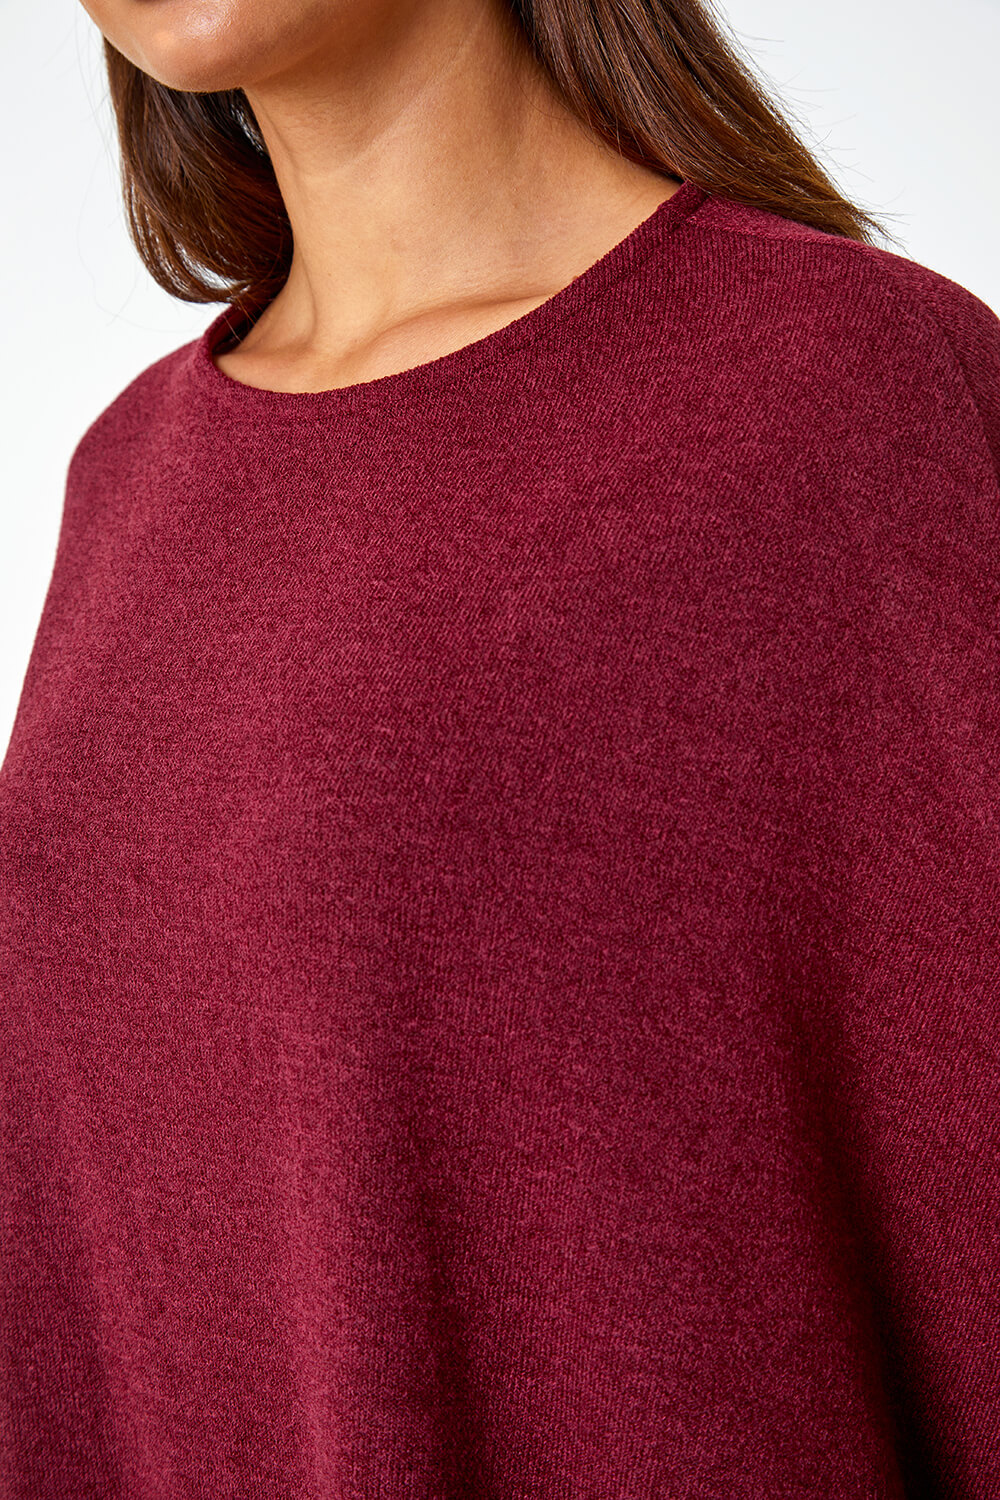 Wine Marl Overlay Stretch Top, Image 5 of 5